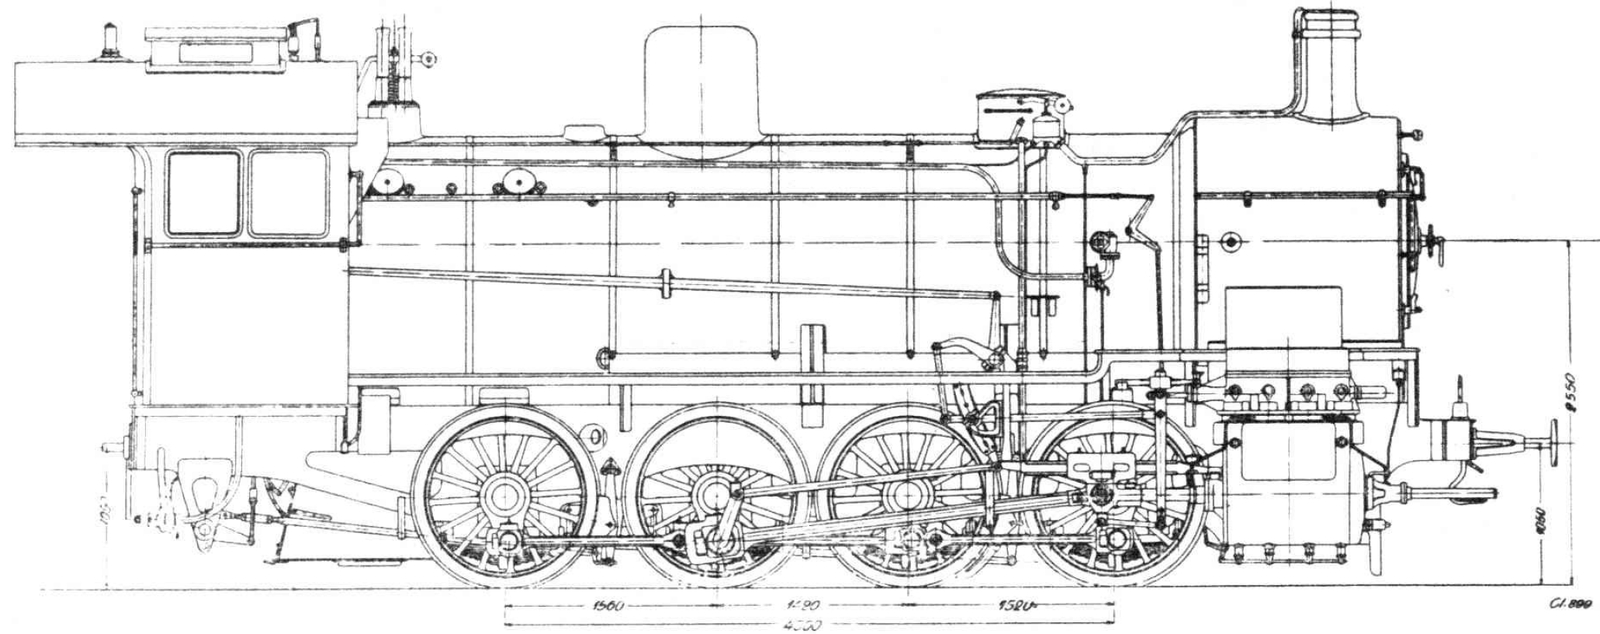 Schematic drawing of a G 8 with Lentz valve gear